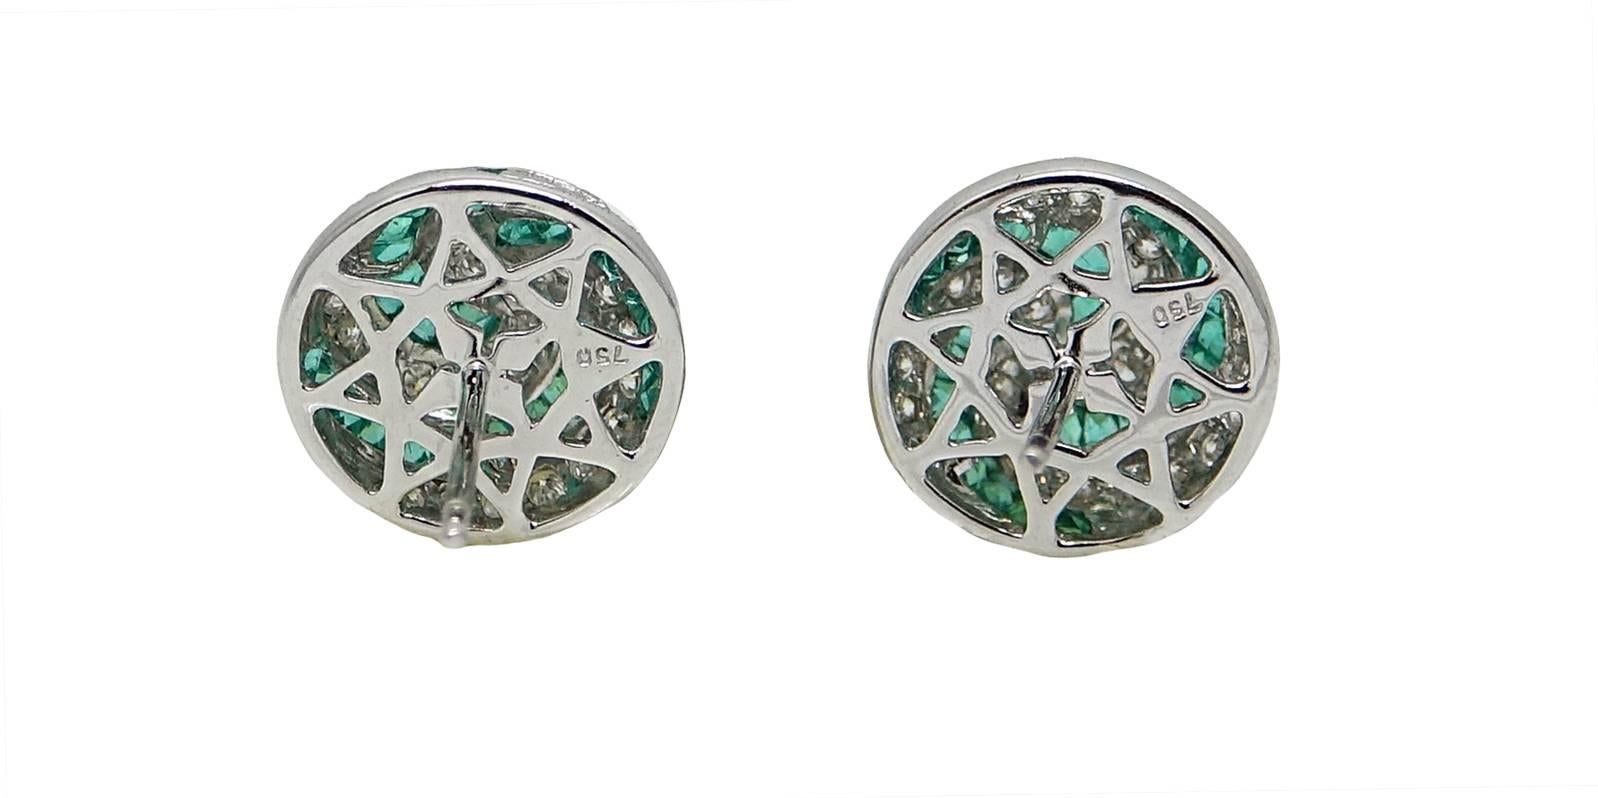 18K White Gold Stud Earrings With A Swirl Design Of Round Cut Diamonds Weighing A Total Carat Weight Of 0.99 Carats and Calibre Cut Emeralds Weighing A Total Carat Weight Of 2.45 Carats.